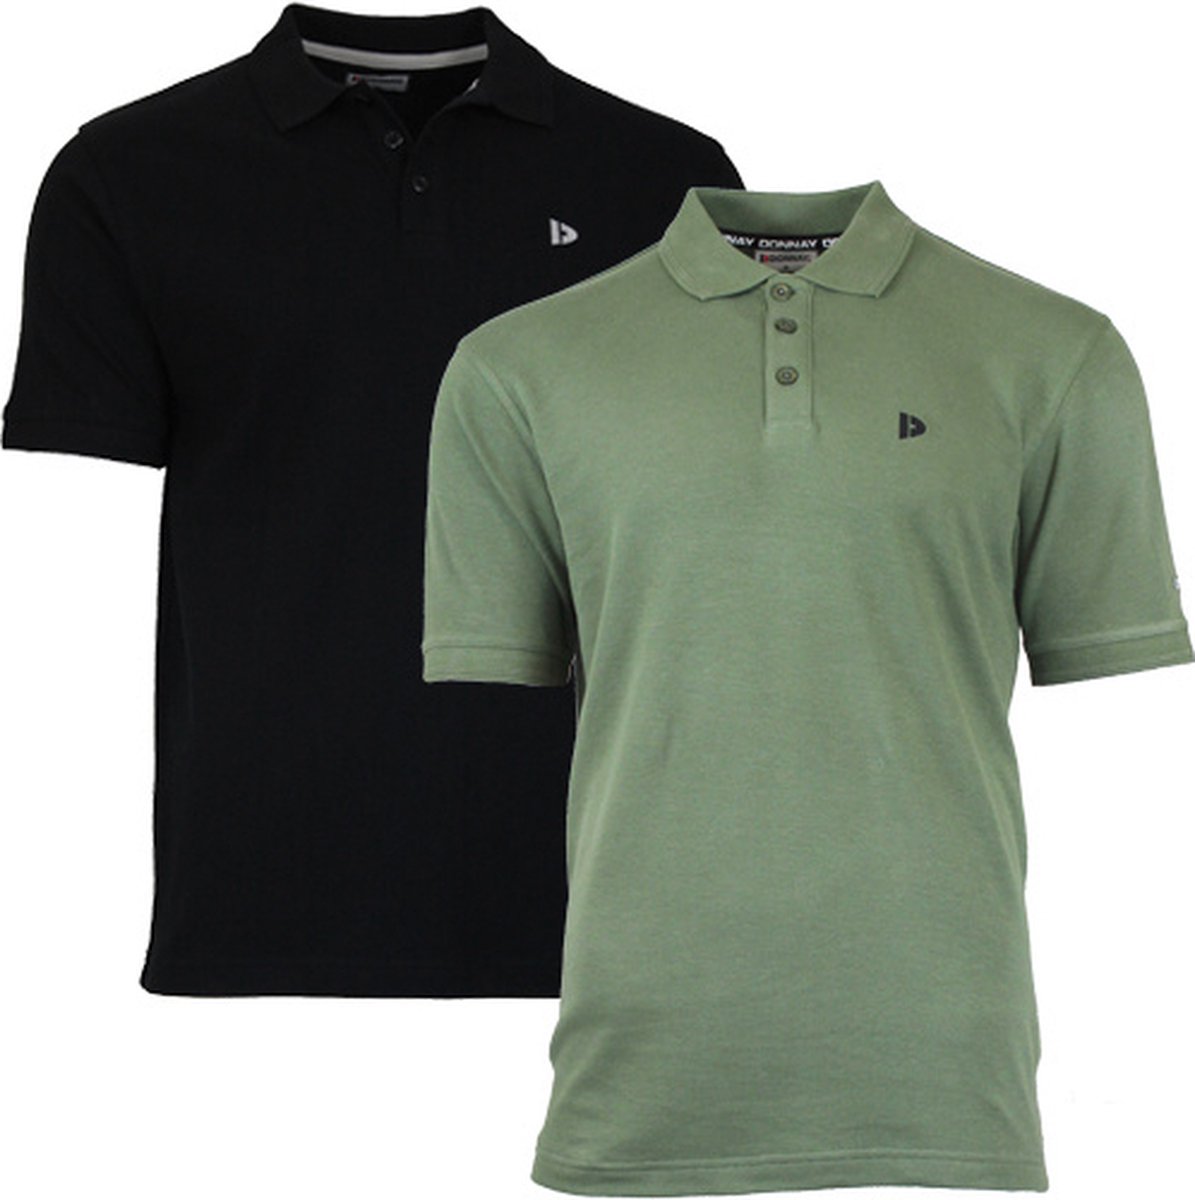 Donnay Polo 2-Pack - Sportpolo - Heren - Maat M - Zwart & Army green (291)